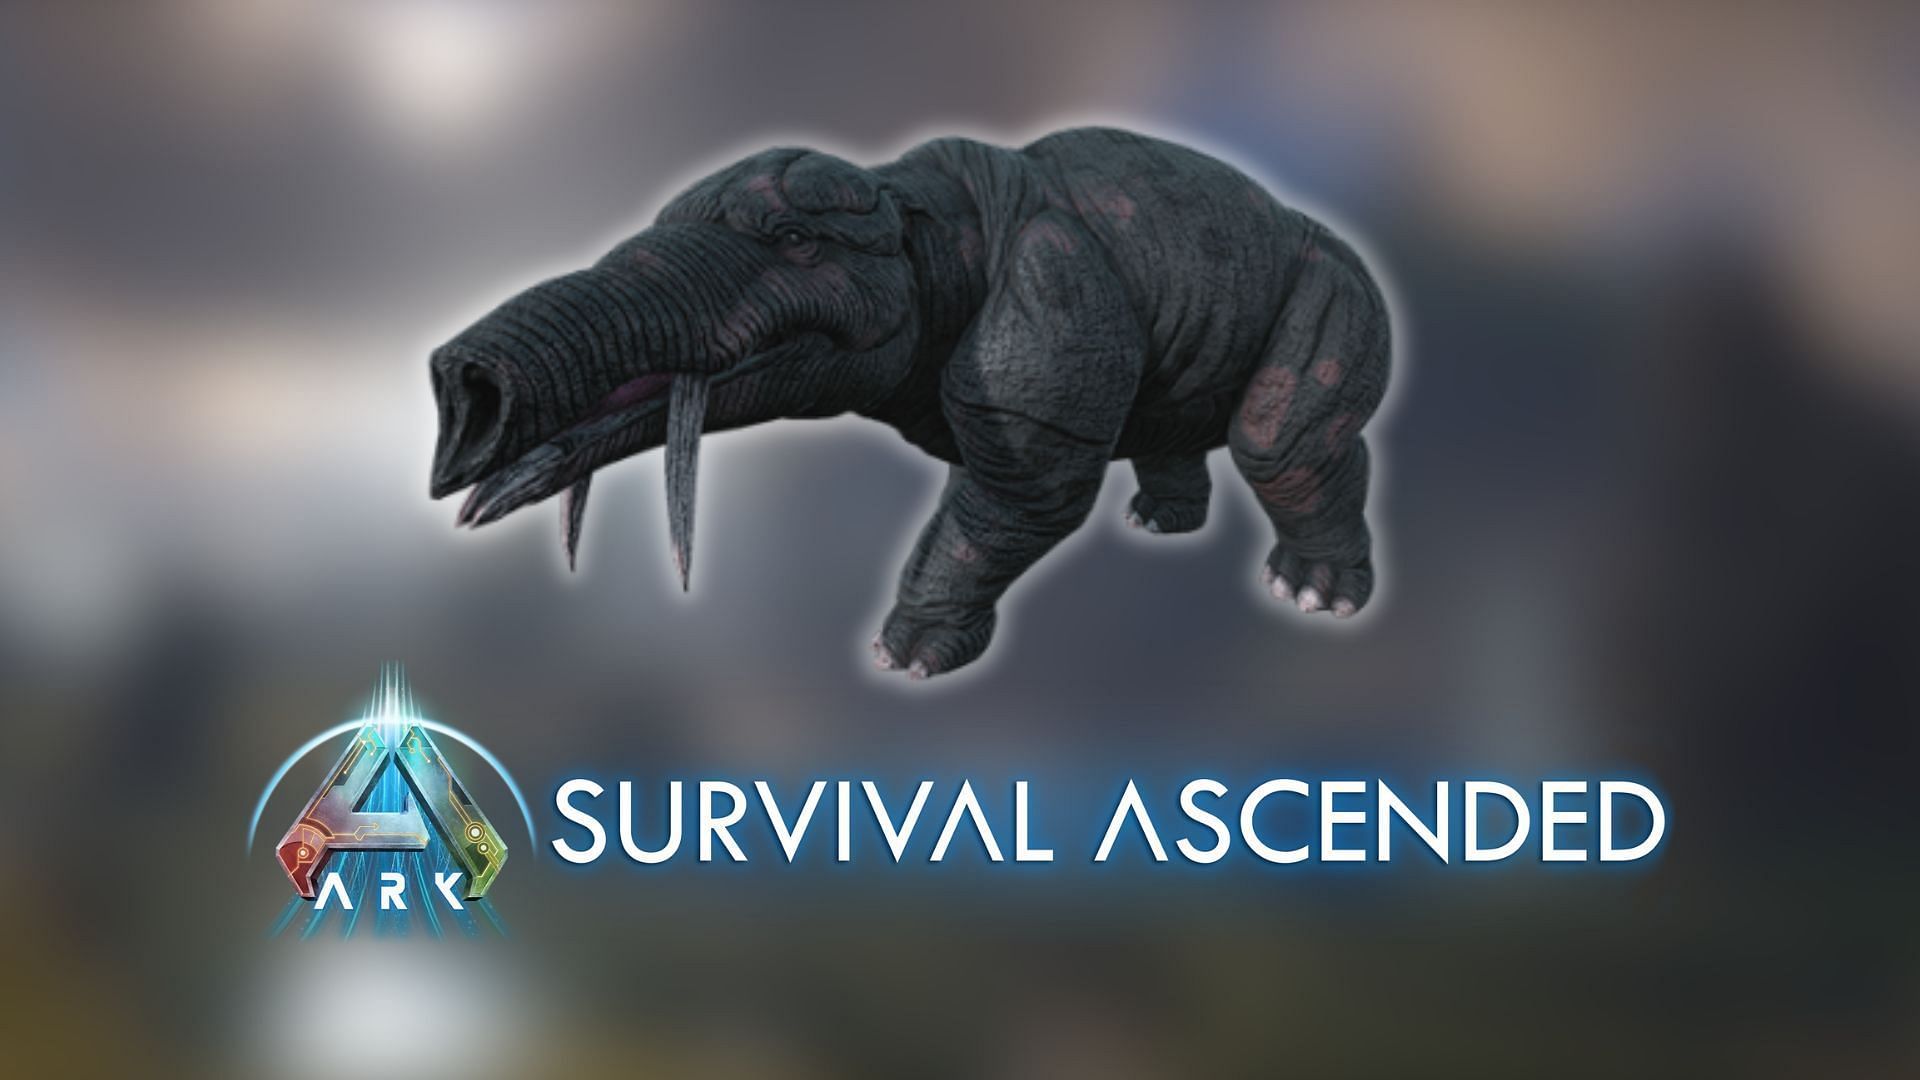 Taming ARK Survival Ascended Phiomia